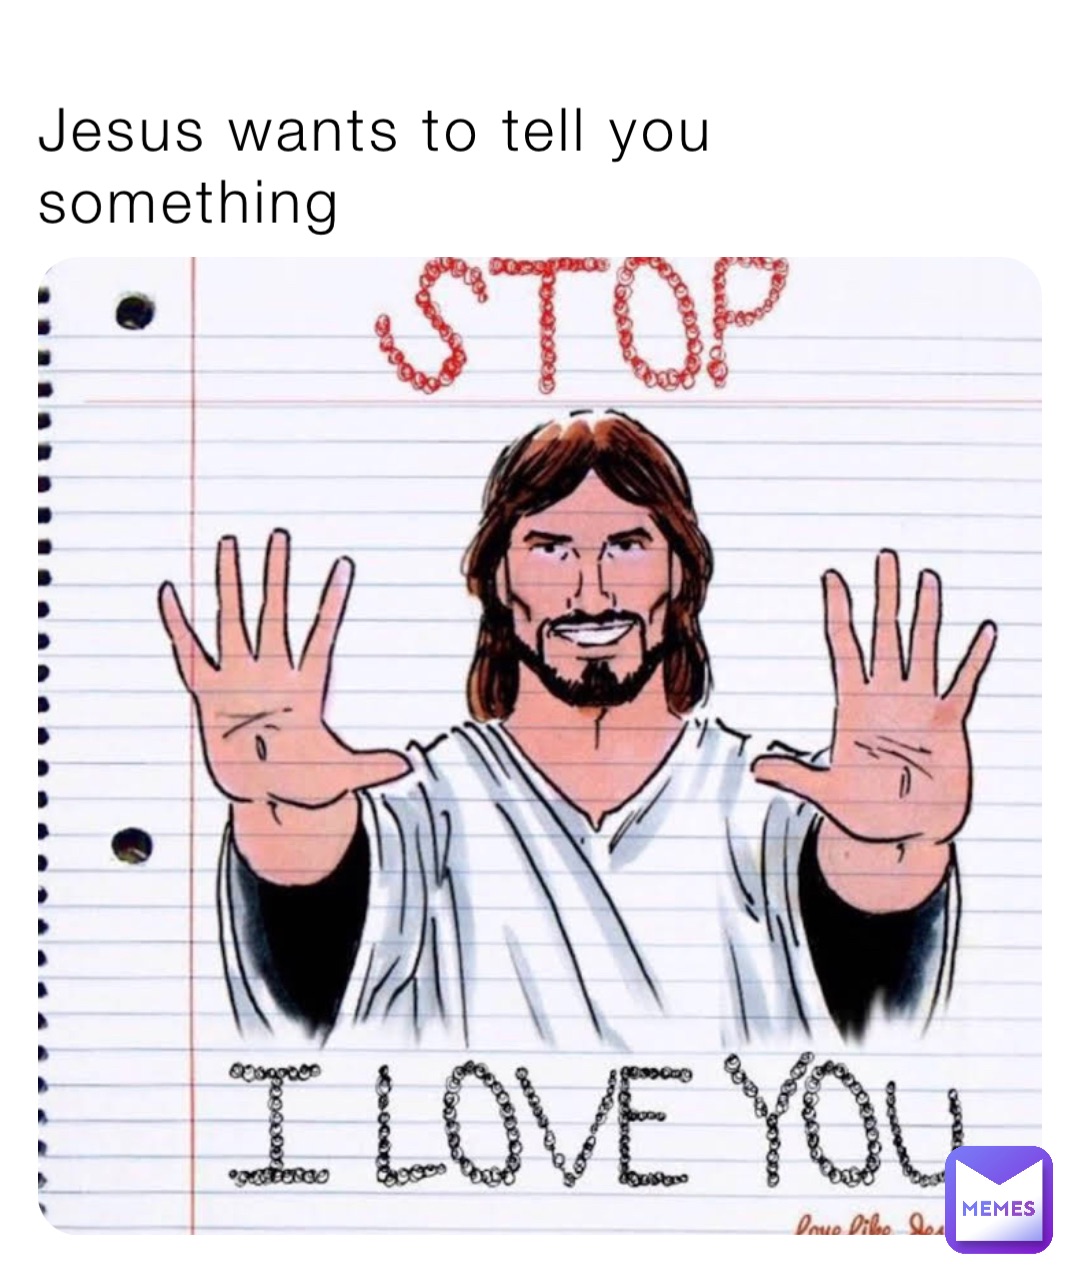 Jesus wants to tell you something